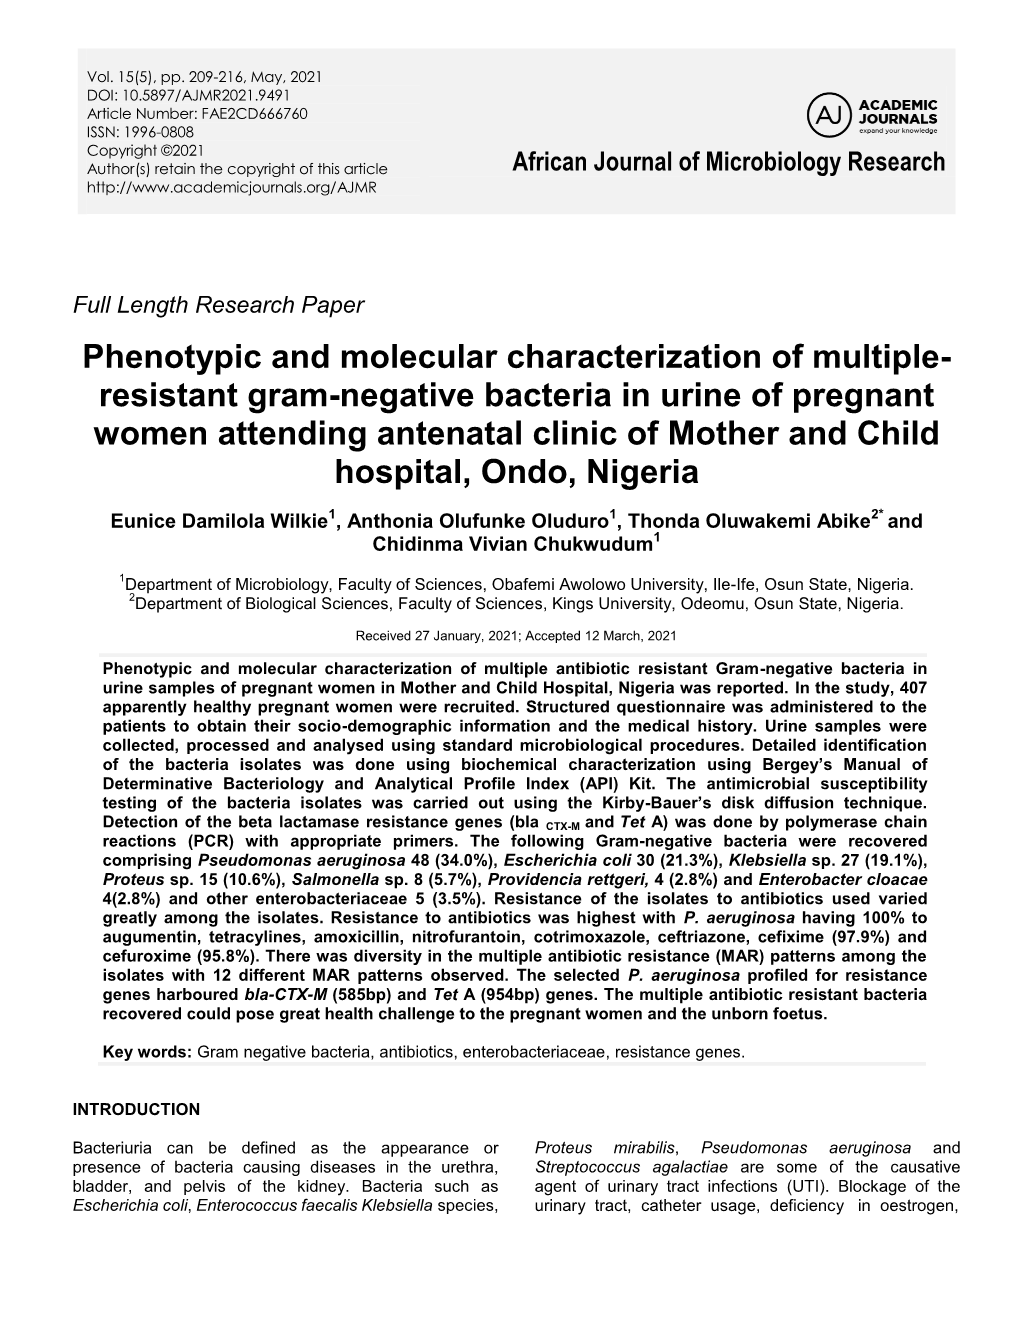 Resistant Gram-Negative Bacteria in Urine of Pregnant Women Attending Antenatal Clinic of Mother and Child Hospital, Ondo, Nigeria